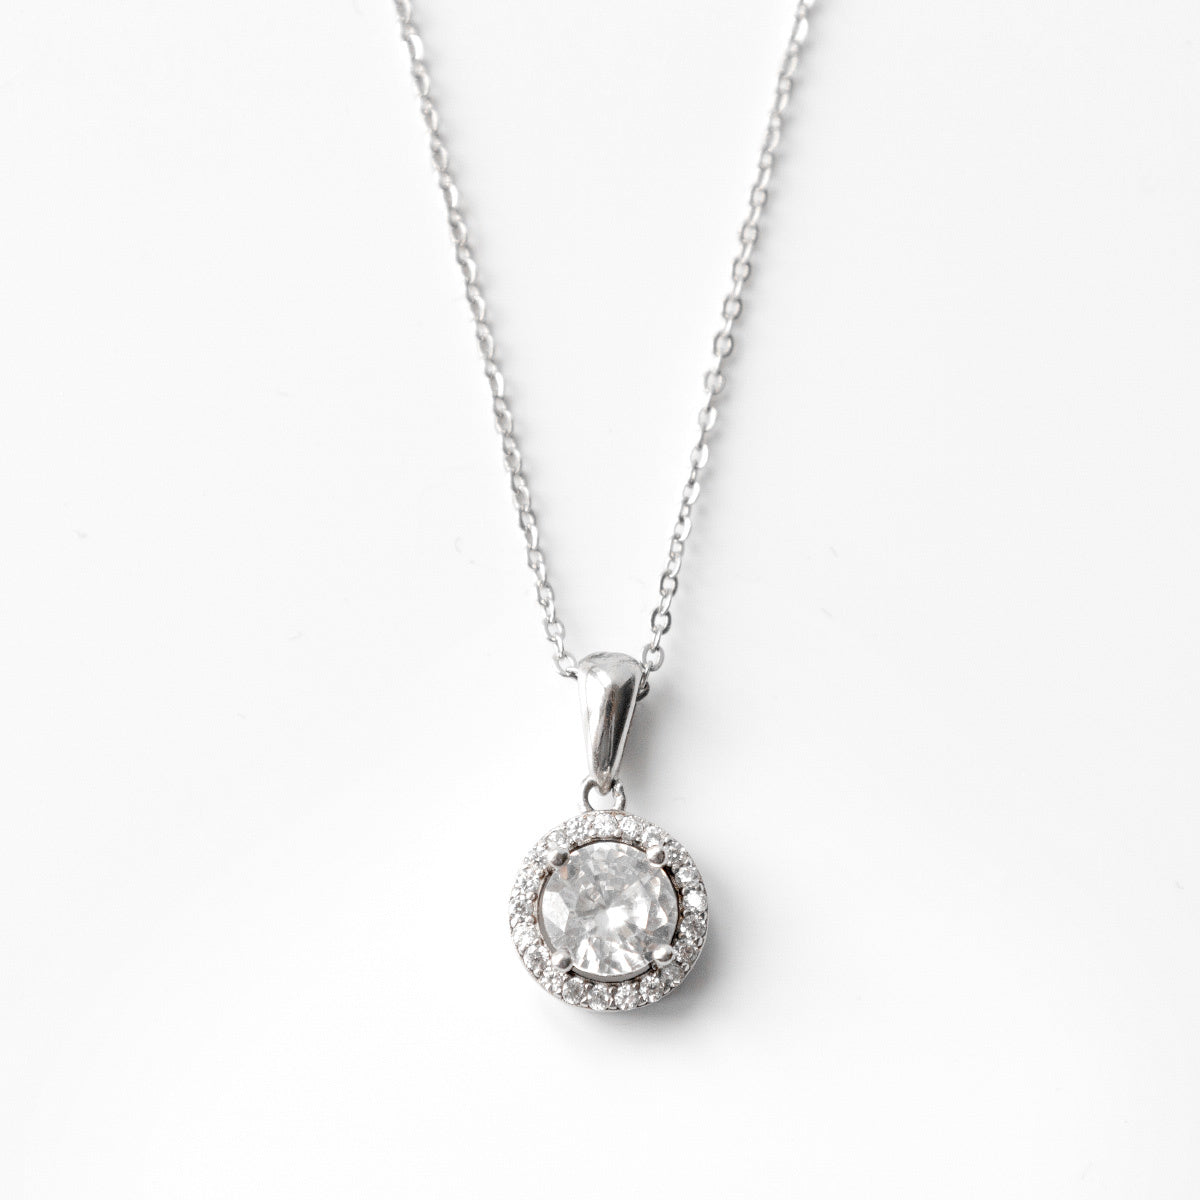 Happy Fifteen Year Anniversary - Classique Sterling Silver Halo Pendant Necklace Gift Set